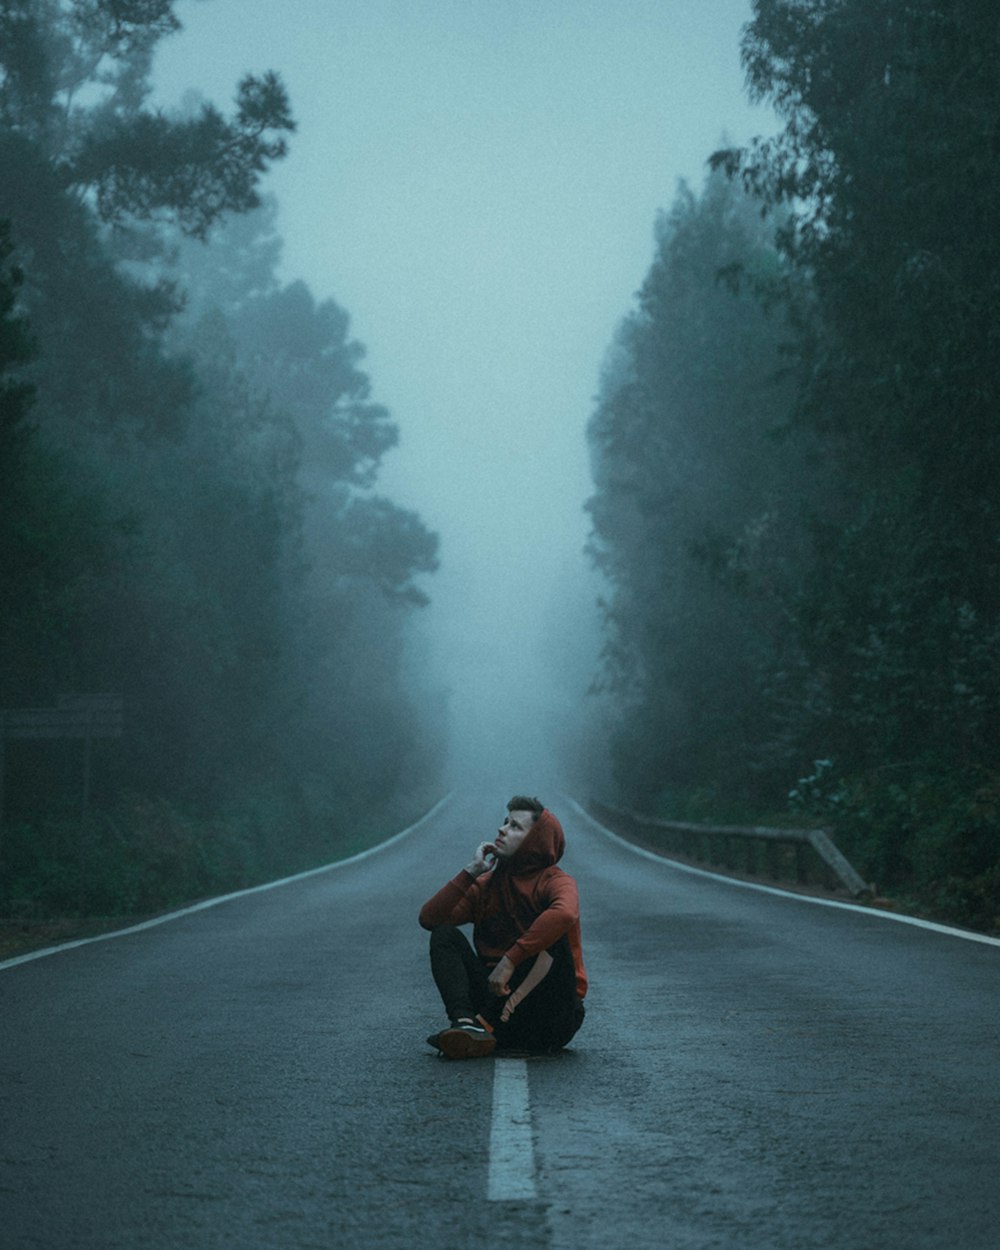 man in red jacket sitting on road during foggy weather